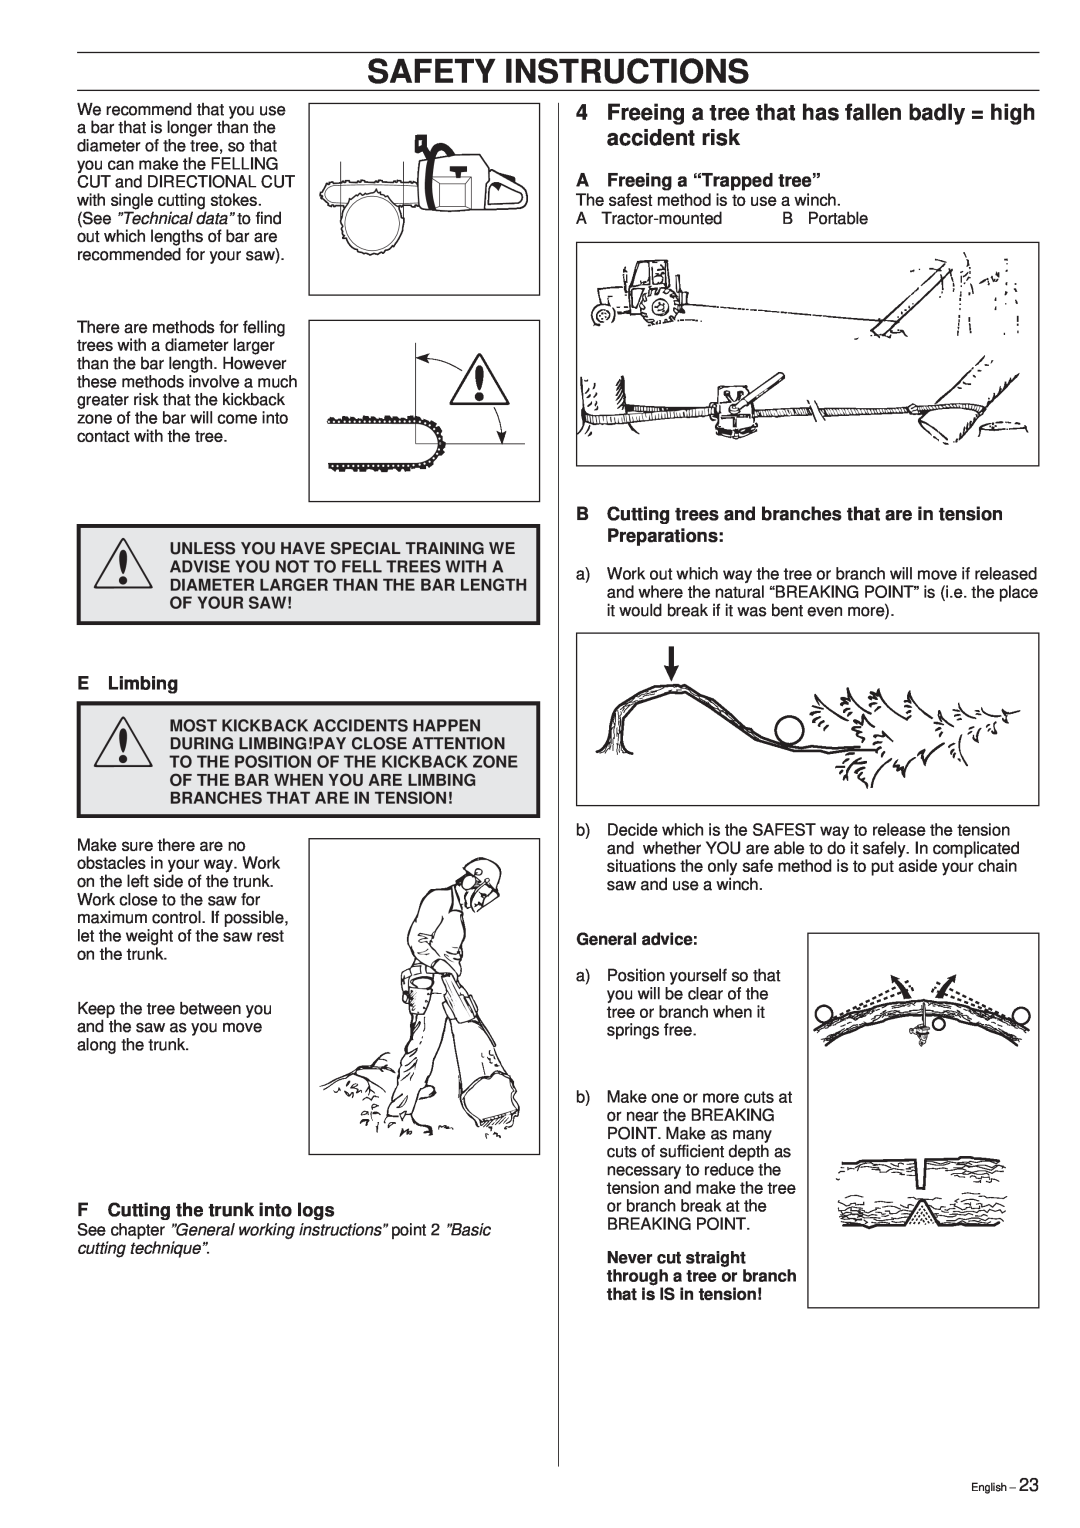 Husqvarna 45 manual Safety Instructions, ELimbing, F Cutting the trunk into logs, AFreeing a “Trapped tree” 